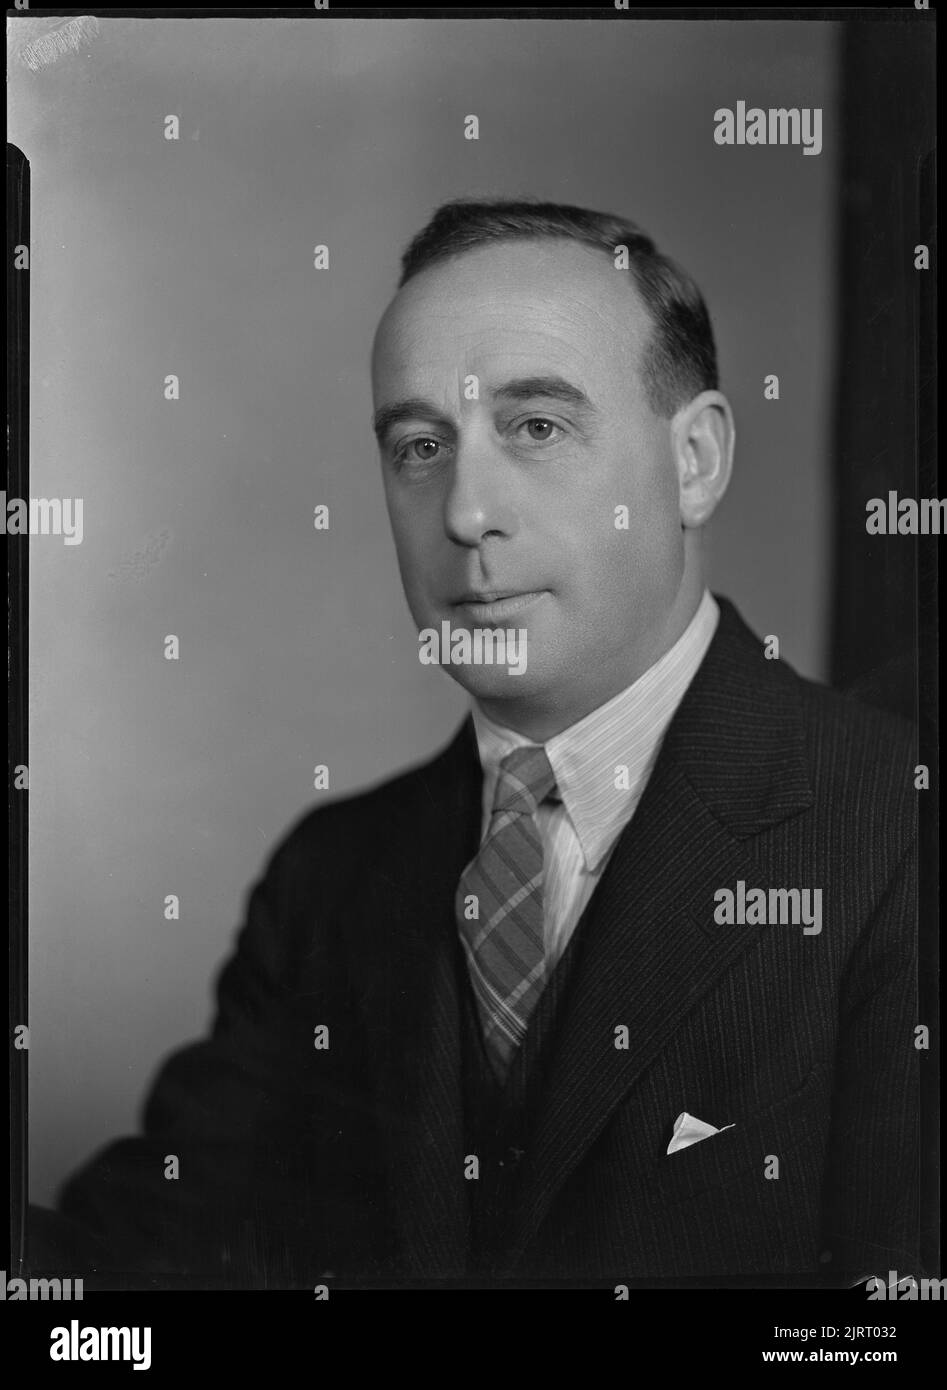 Mr GF Penny, 1936, Wellington, by Spencer Digby Studios. Spencer Digby / Ronald D Woolf Collection. Gift of Ronald Woolf, 1975. Stock Photo